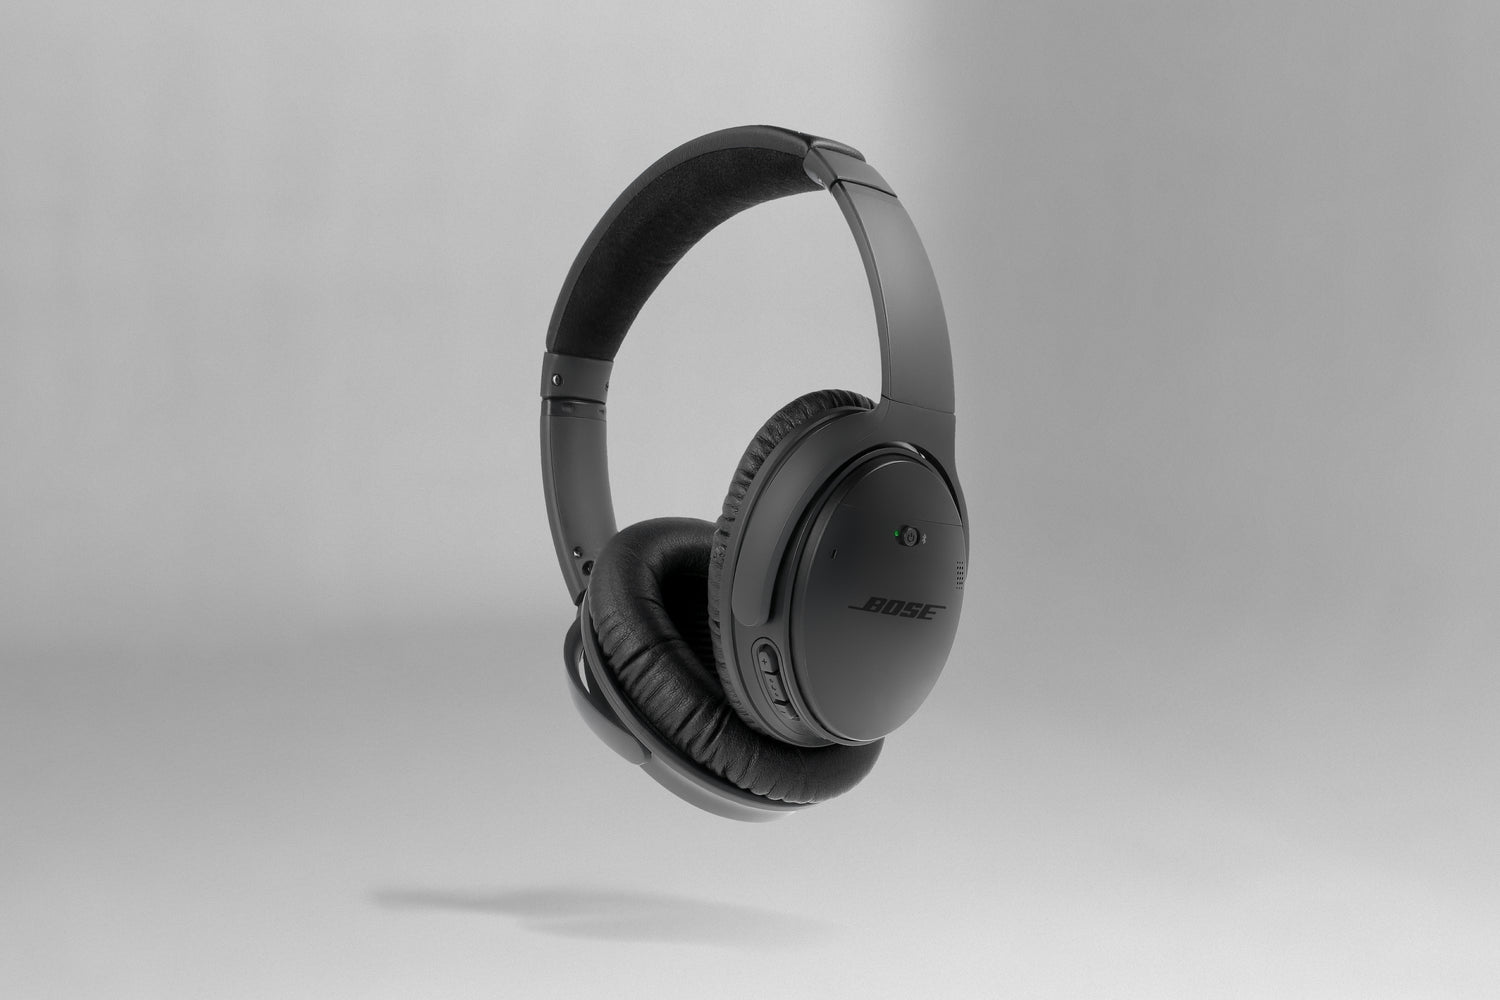 Bose headphones product photography